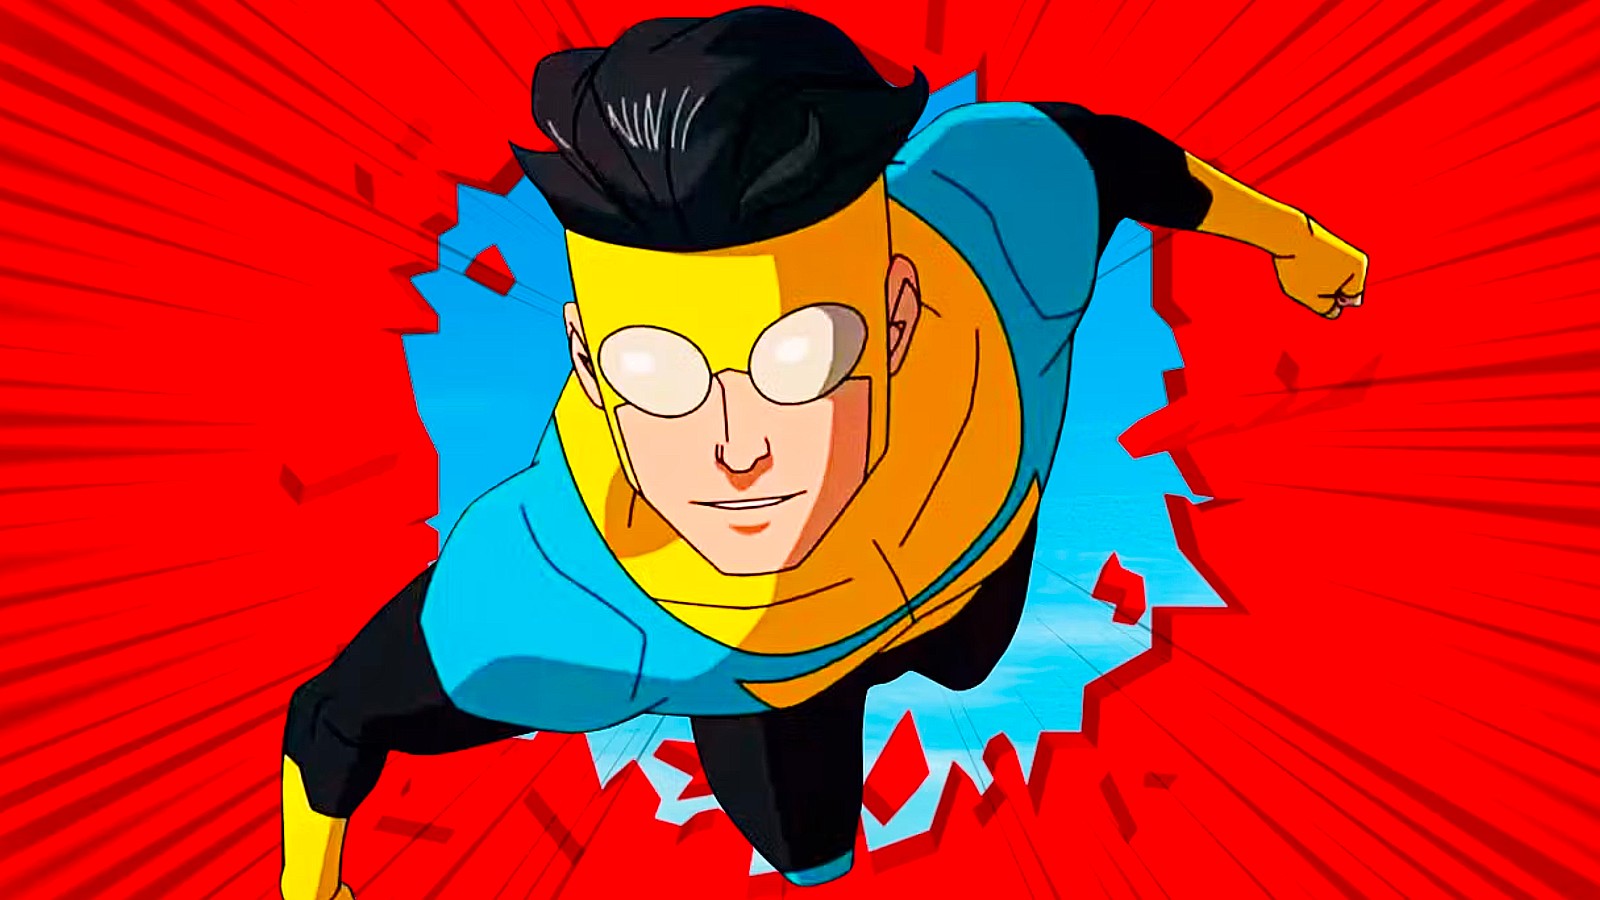 Invincible Season 2: Release Date, Trailer, Cast, and Everything